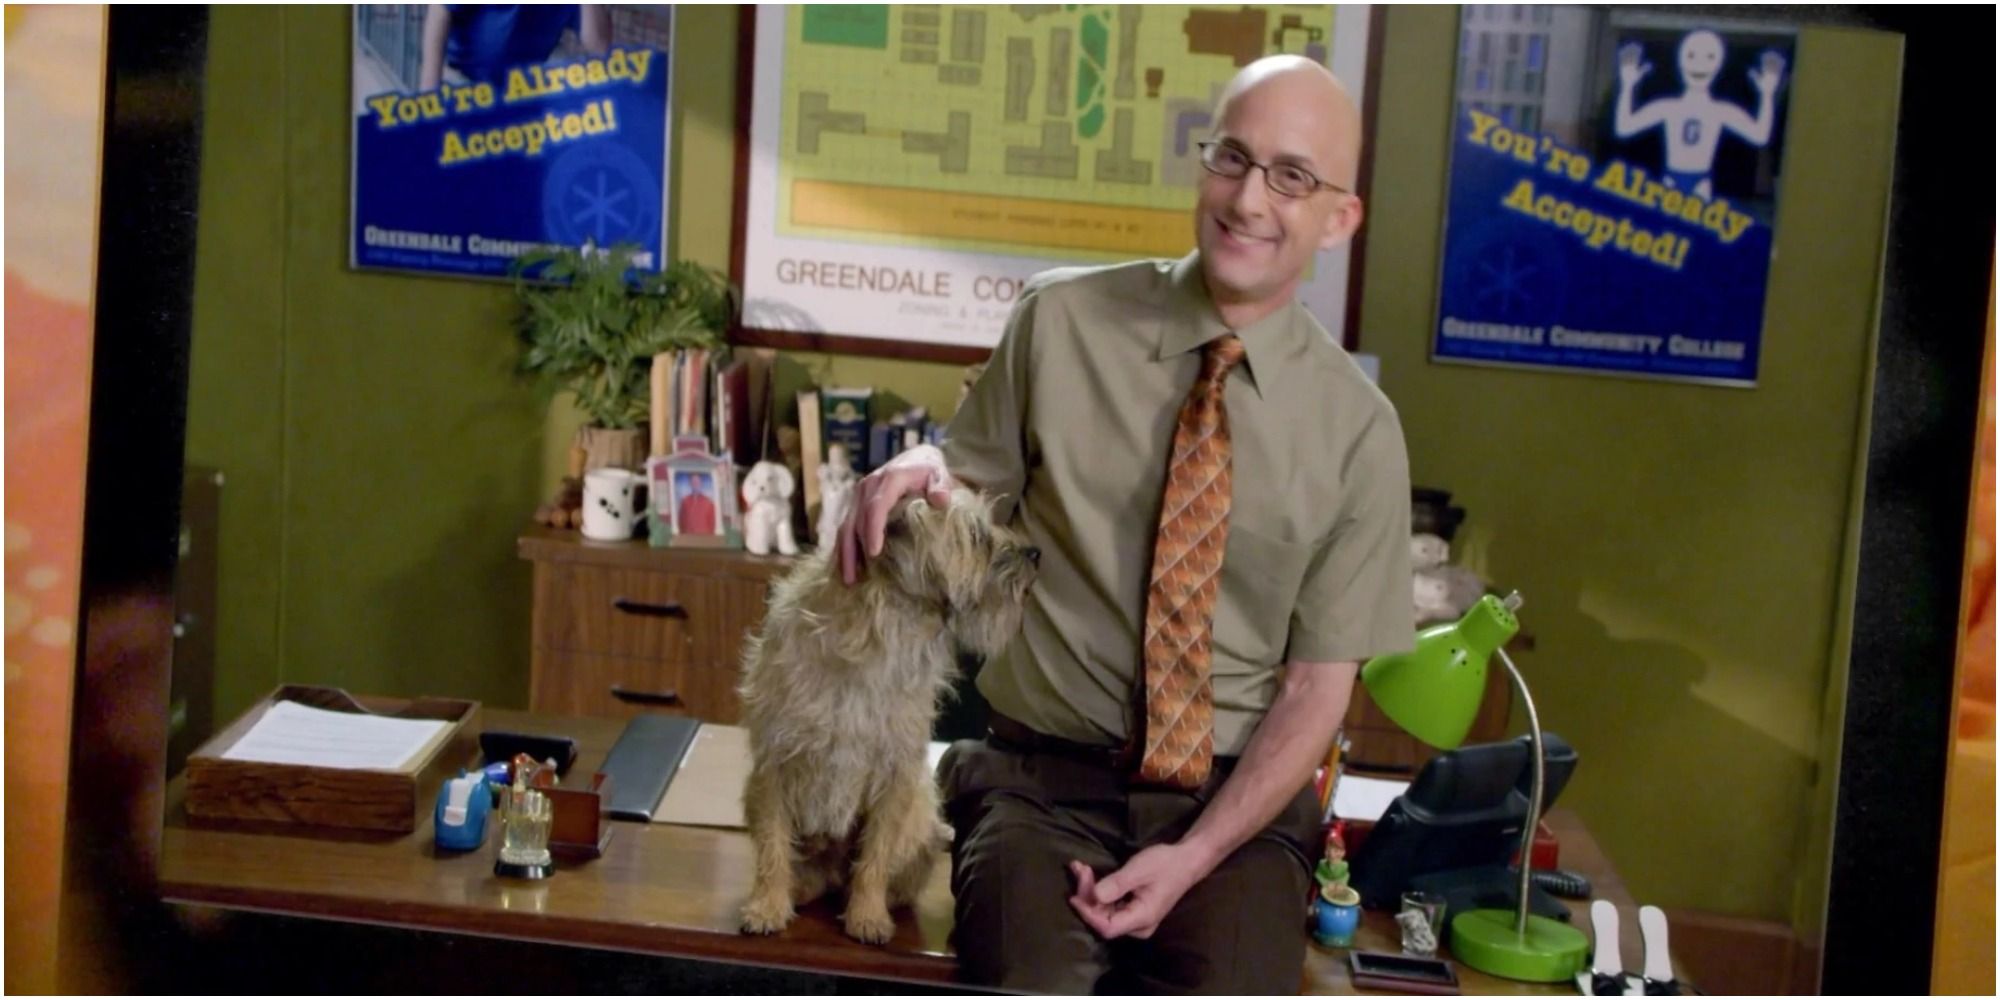 Dean Pelton poses with the dog that almost got a degree at Greendale